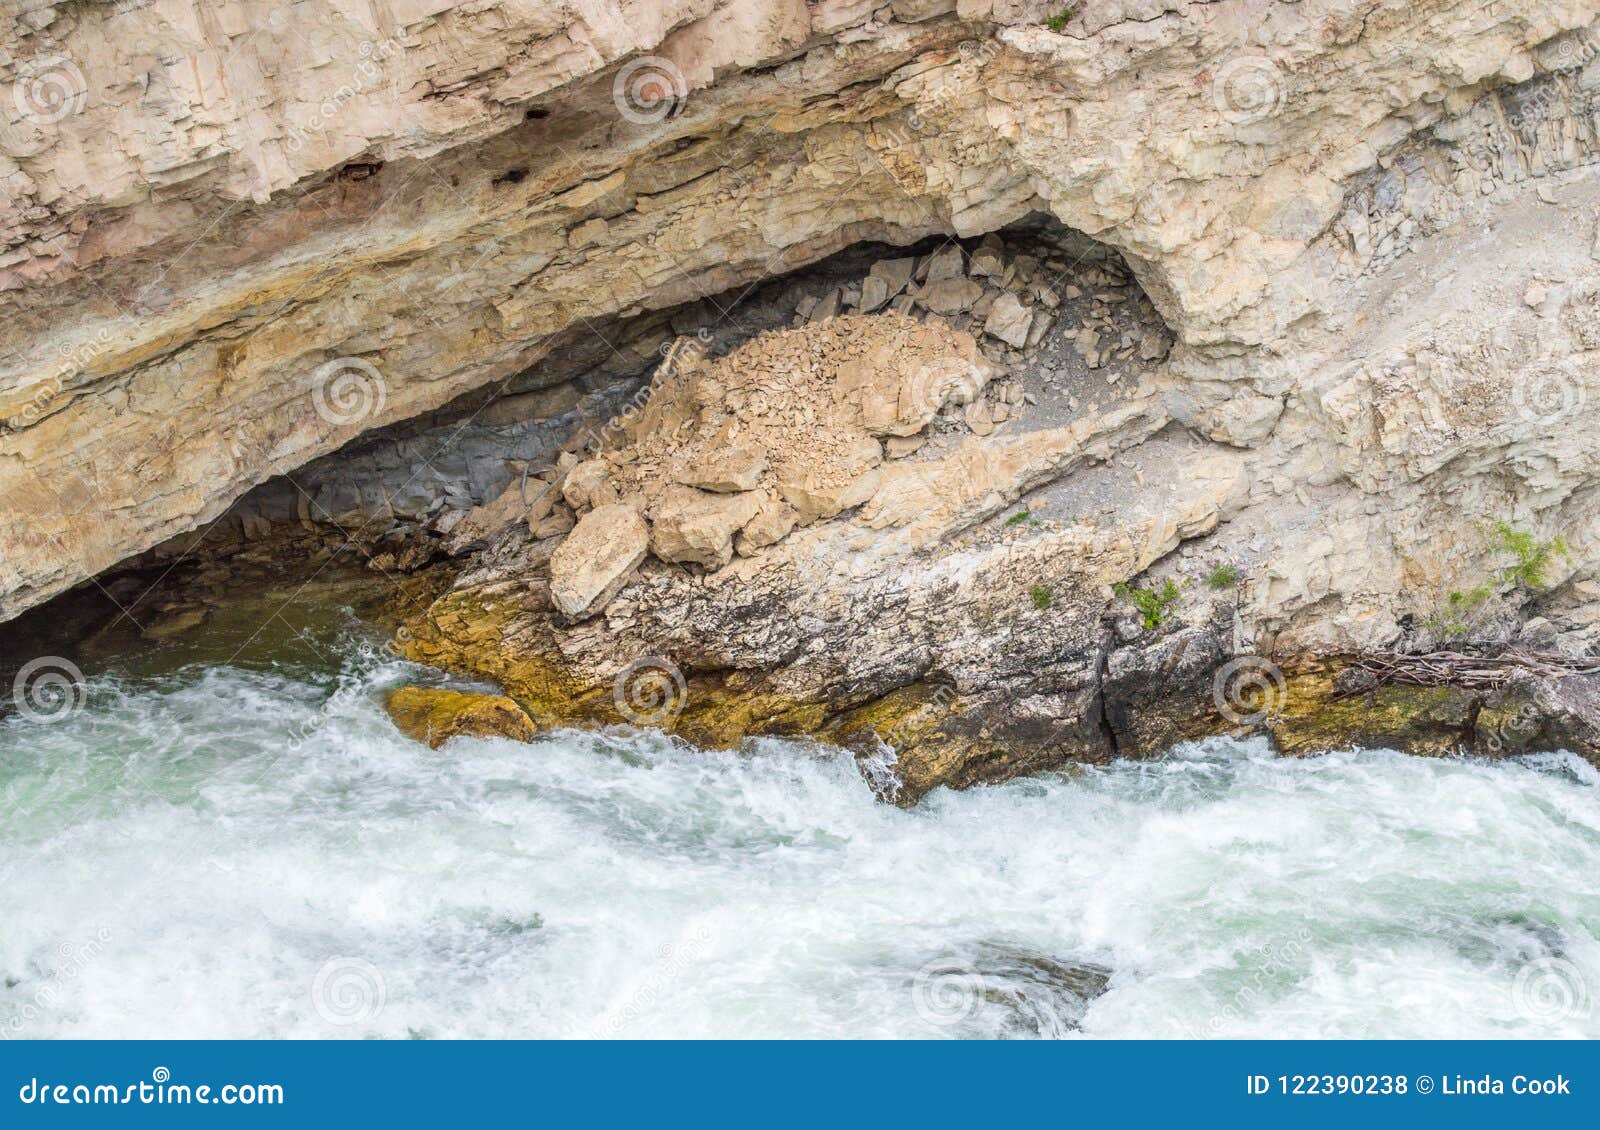 boulder river rushing through a sea grotto and jagged rock wall in montana